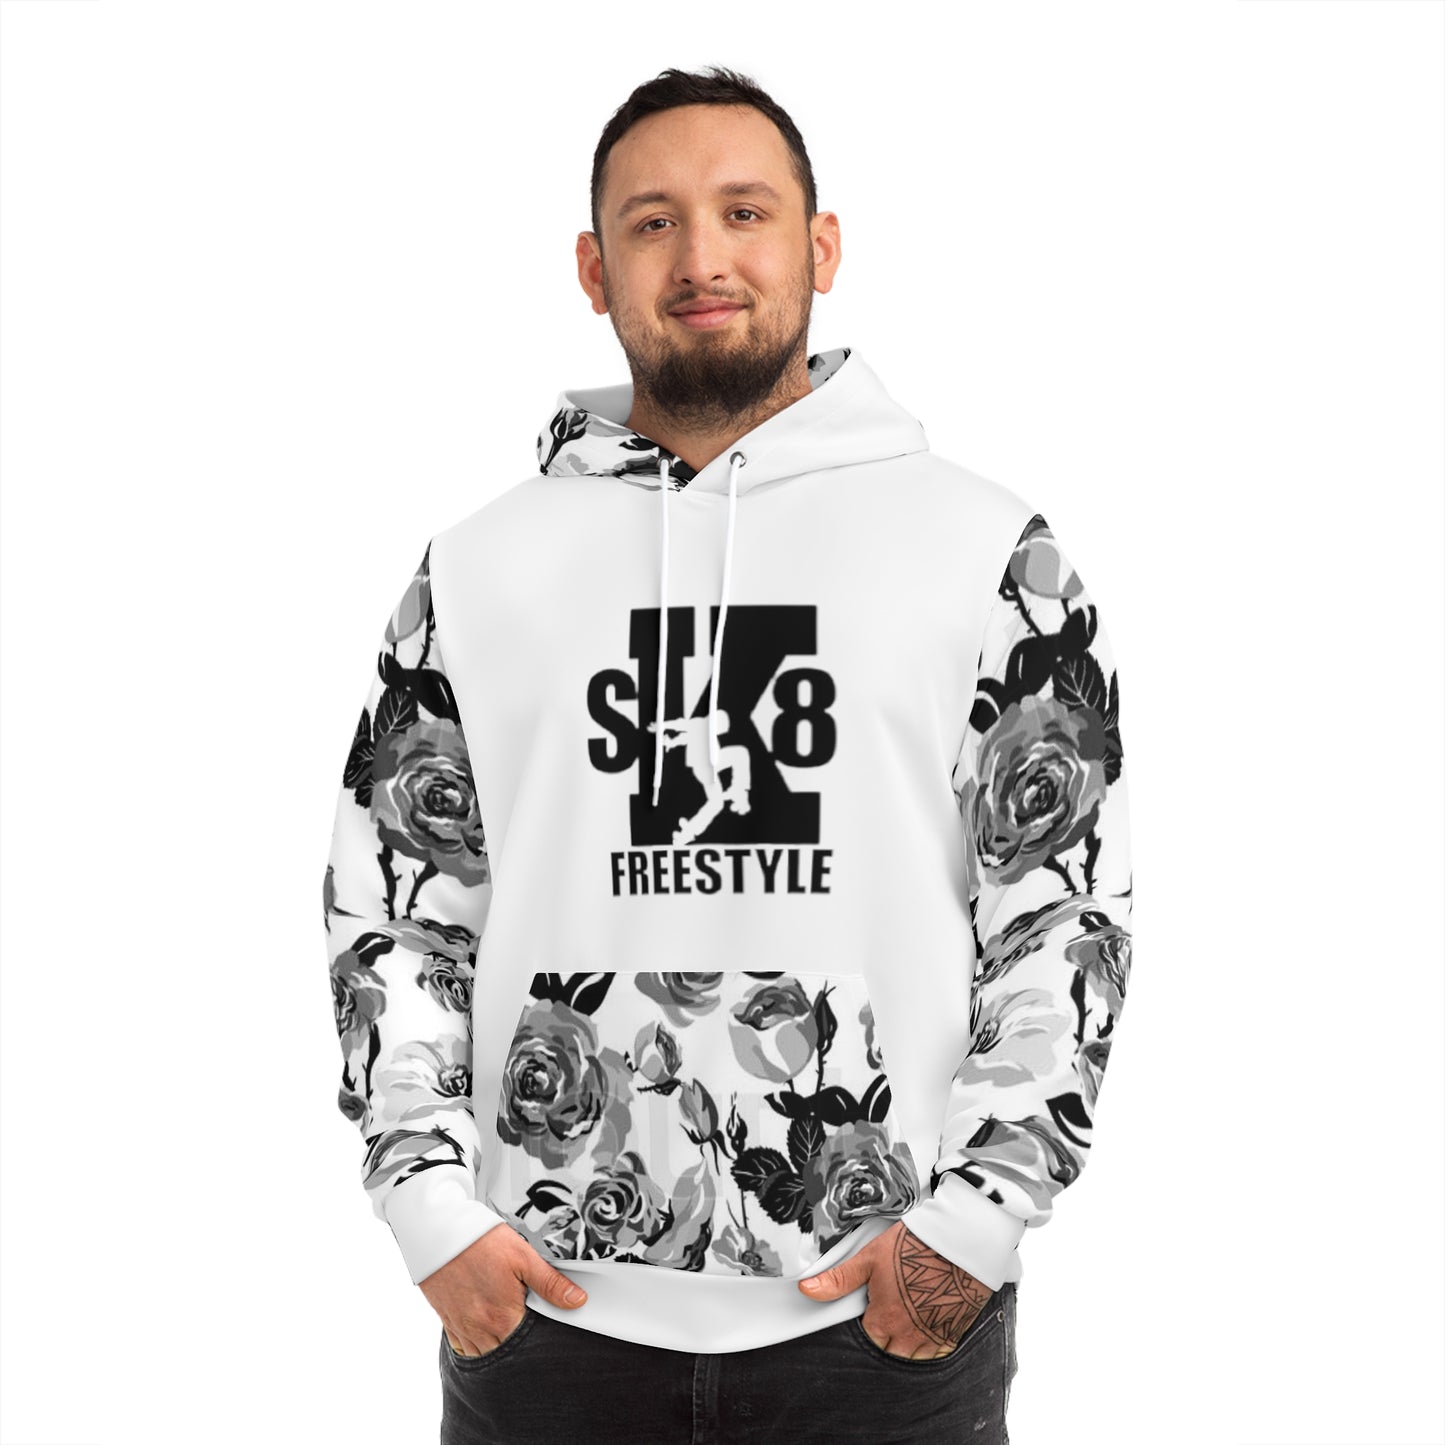 "Sk8t Freestyle" Fashion Hoodie